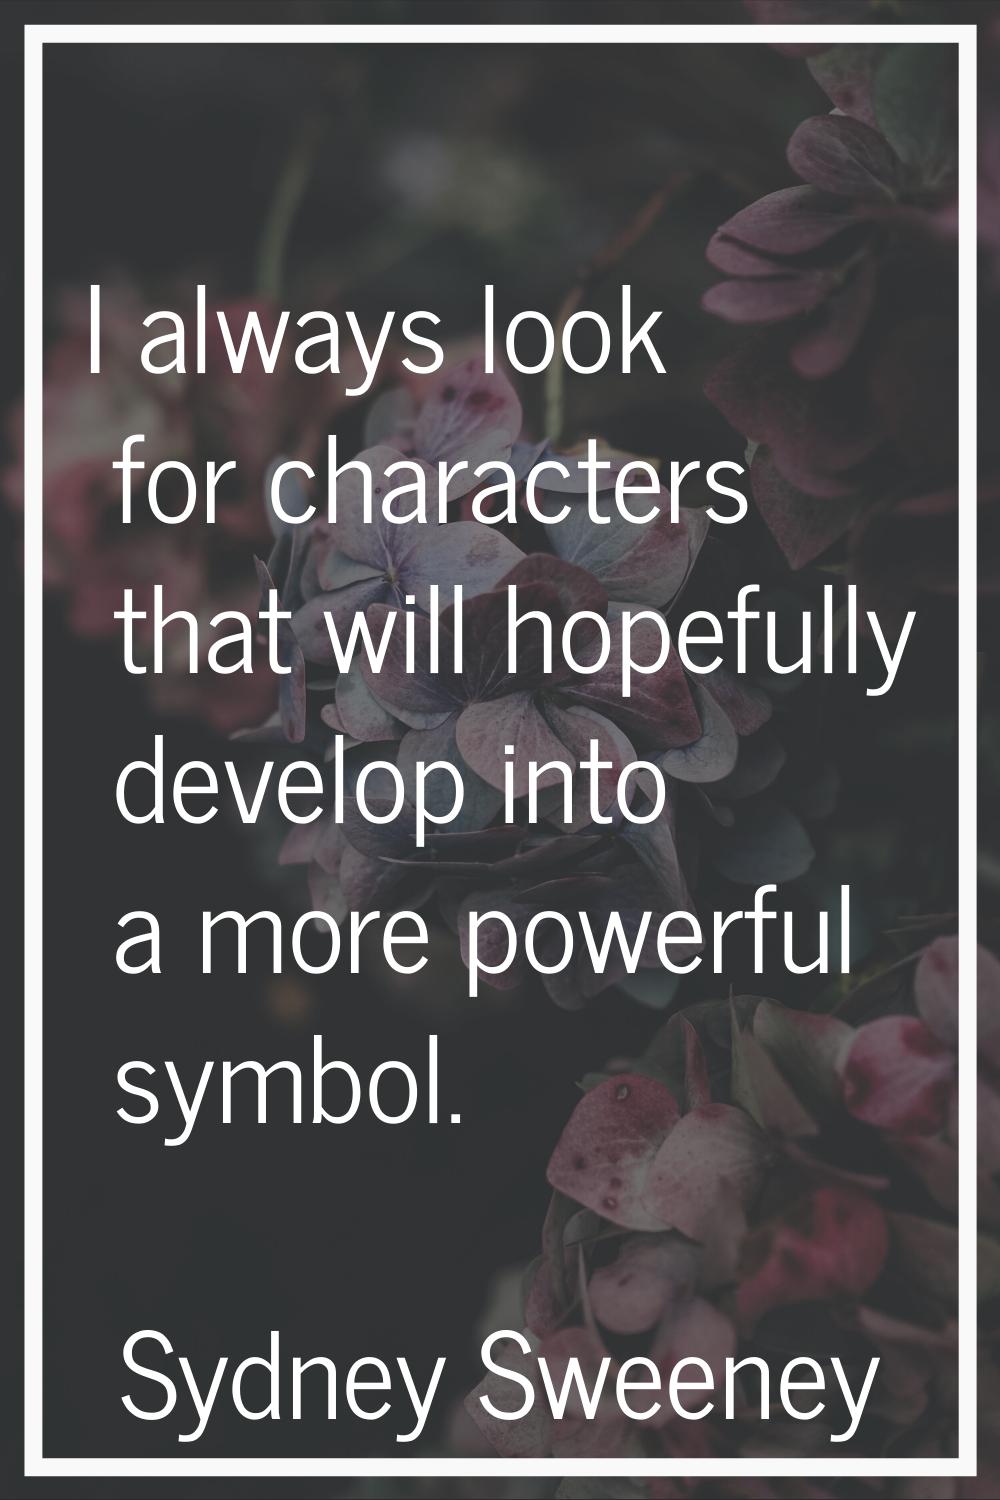 I always look for characters that will hopefully develop into a more powerful symbol.